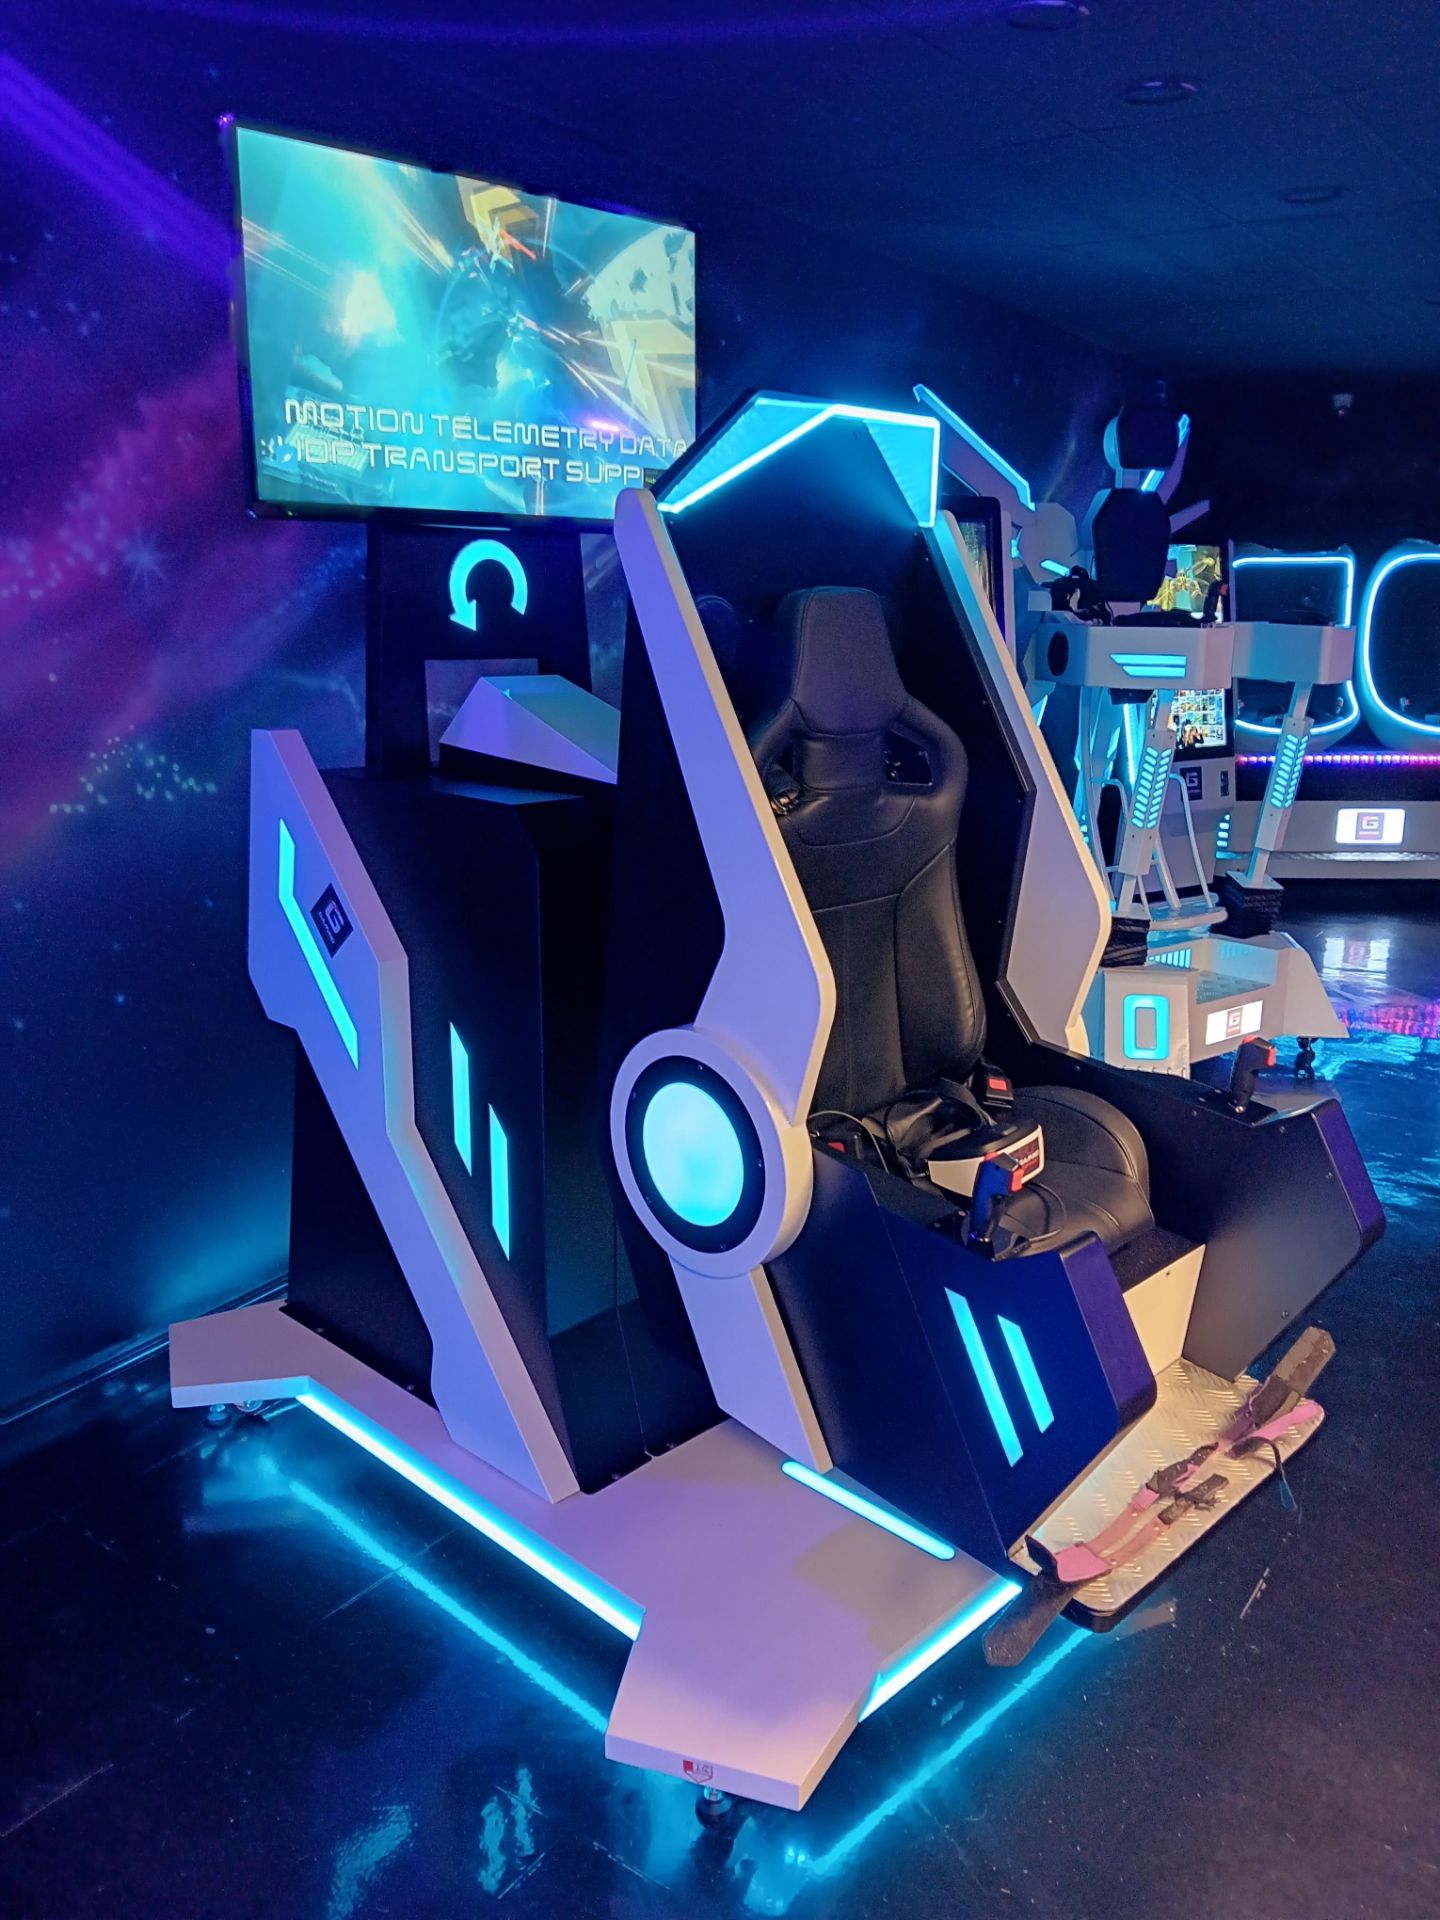 Movie Power 360 Degree VR Space Coaster – Cost New £14,400 – Buyer to Disconnect & remove from